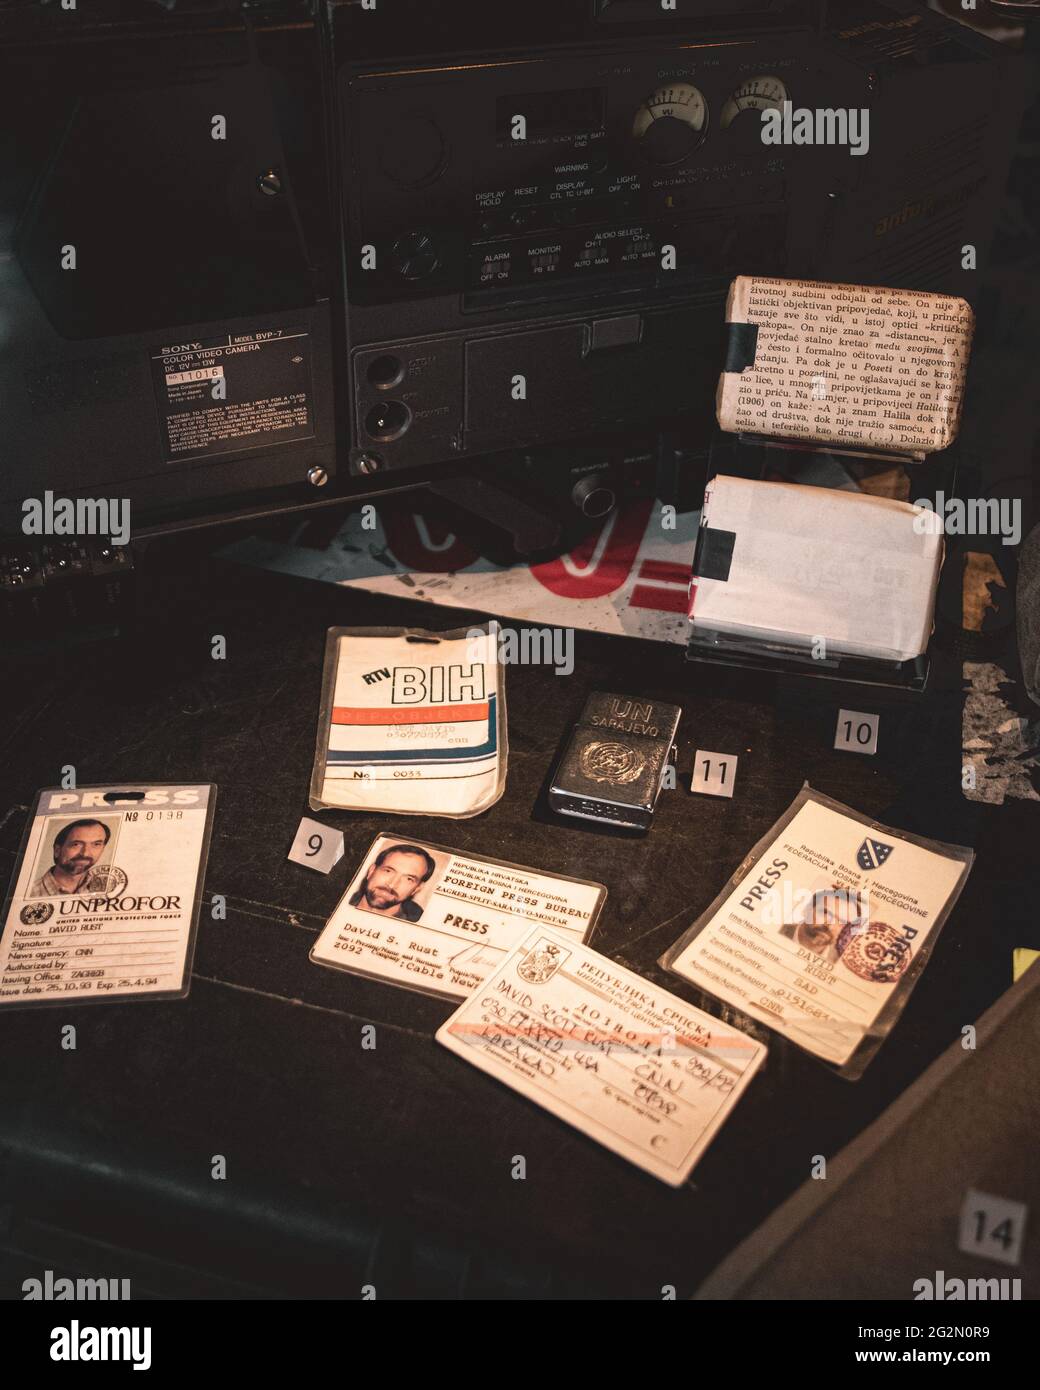 Duxford England May 2021 Exhibit of bosnian and serbian journalist identification papers from the yugoslav wars in the 90s Stock Photo